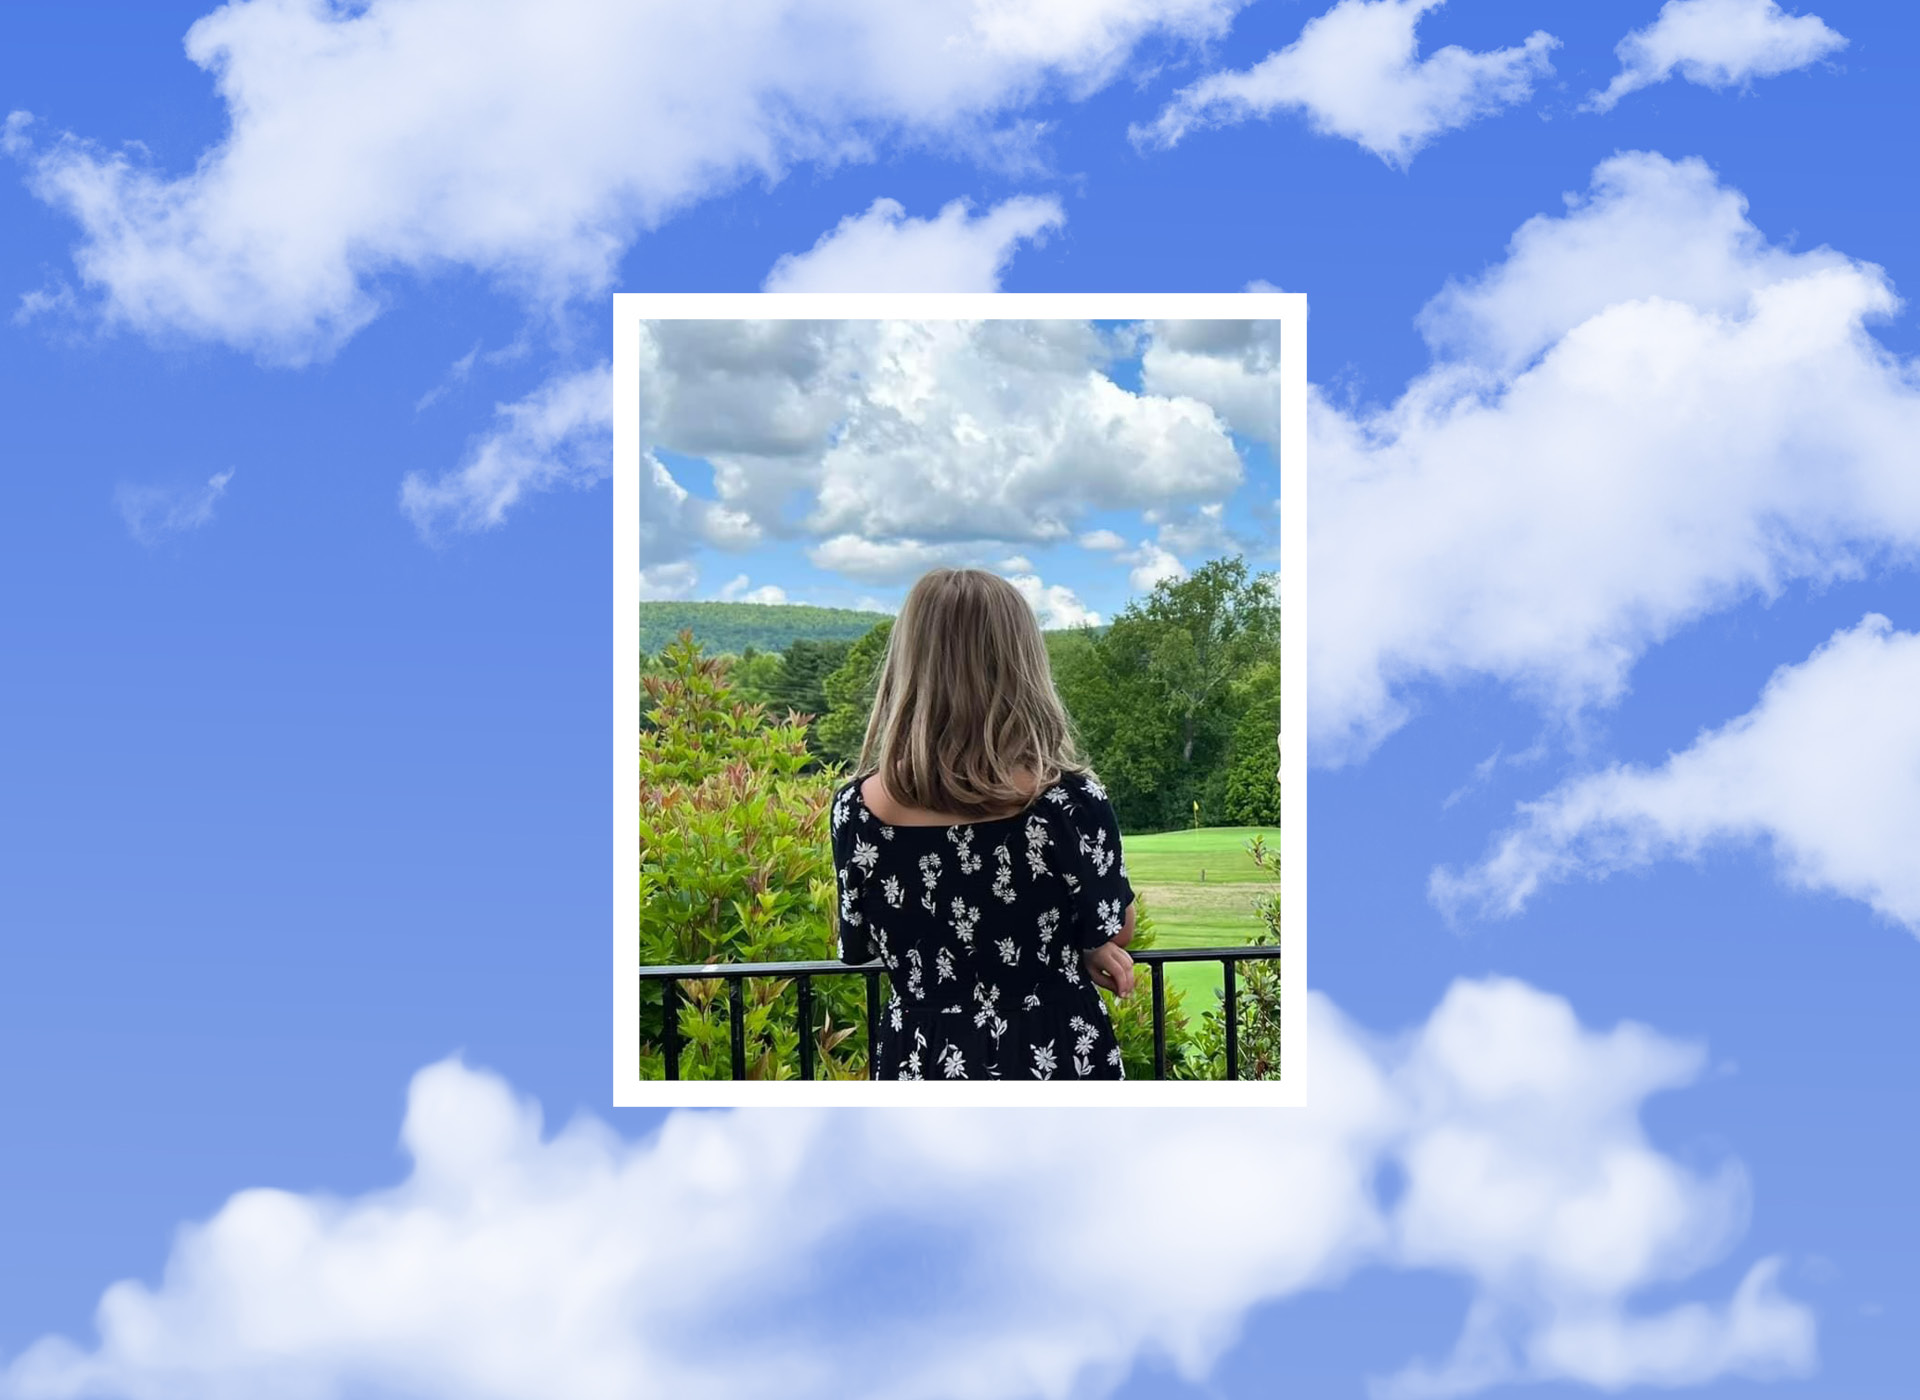 image of blonde little girl from behind looking out at a field against a sky with clouds background